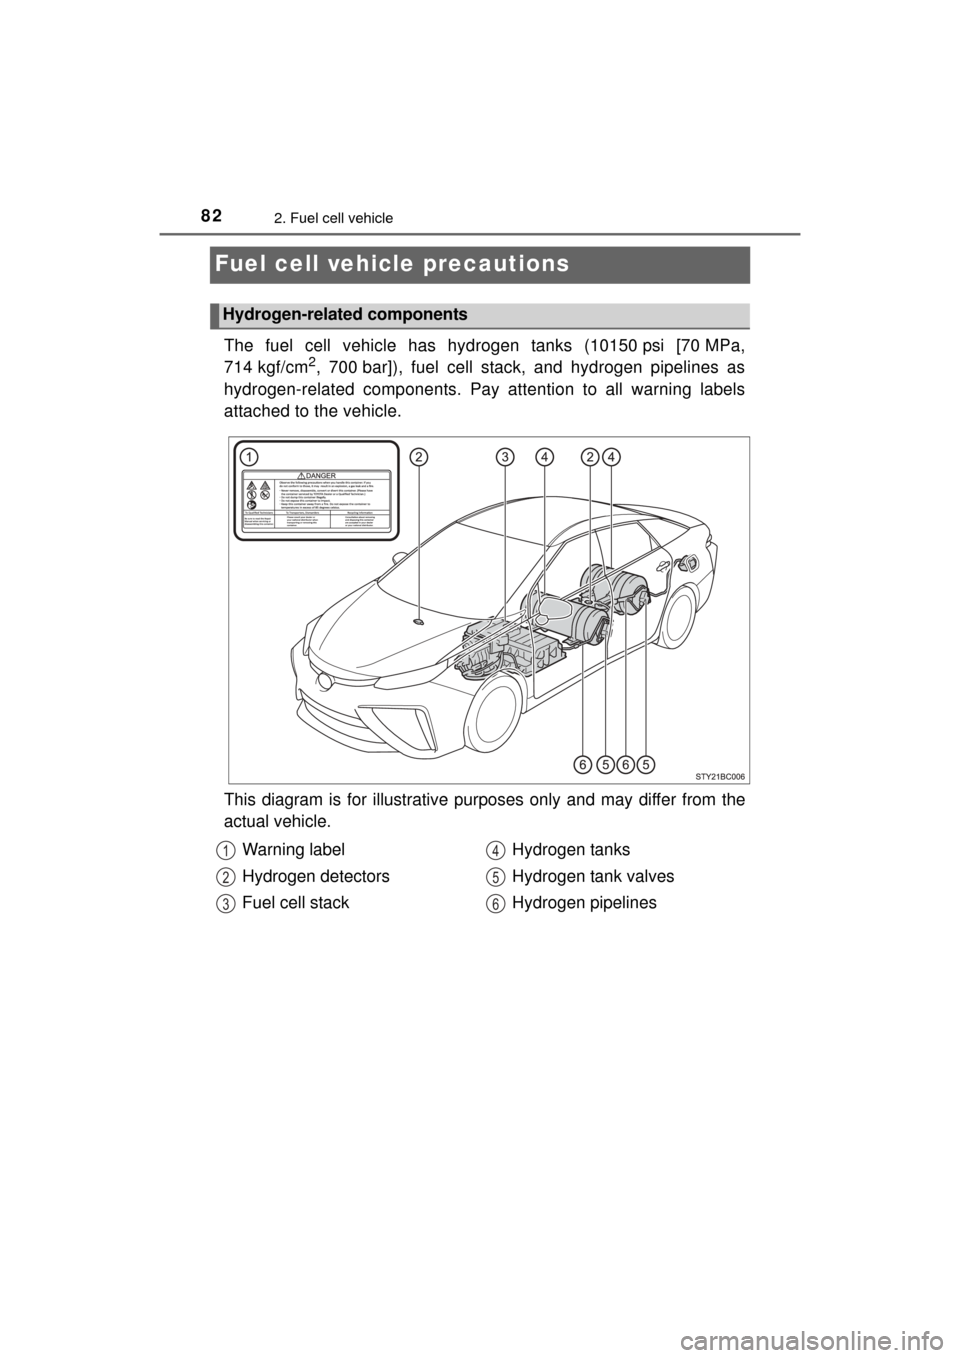 TOYOTA MIRAI 2016 1.G Owners Manual 822. Fuel cell vehicle
MIRAI_OM_USA_OM62004U
Fuel cell vehicle precautions
The fuel cell vehicle has hydrogen tanks (10150 psi [70 MPa,
714 kgf/cm2, 700 bar]), fuel cell stack, and hydrogen pipelines 